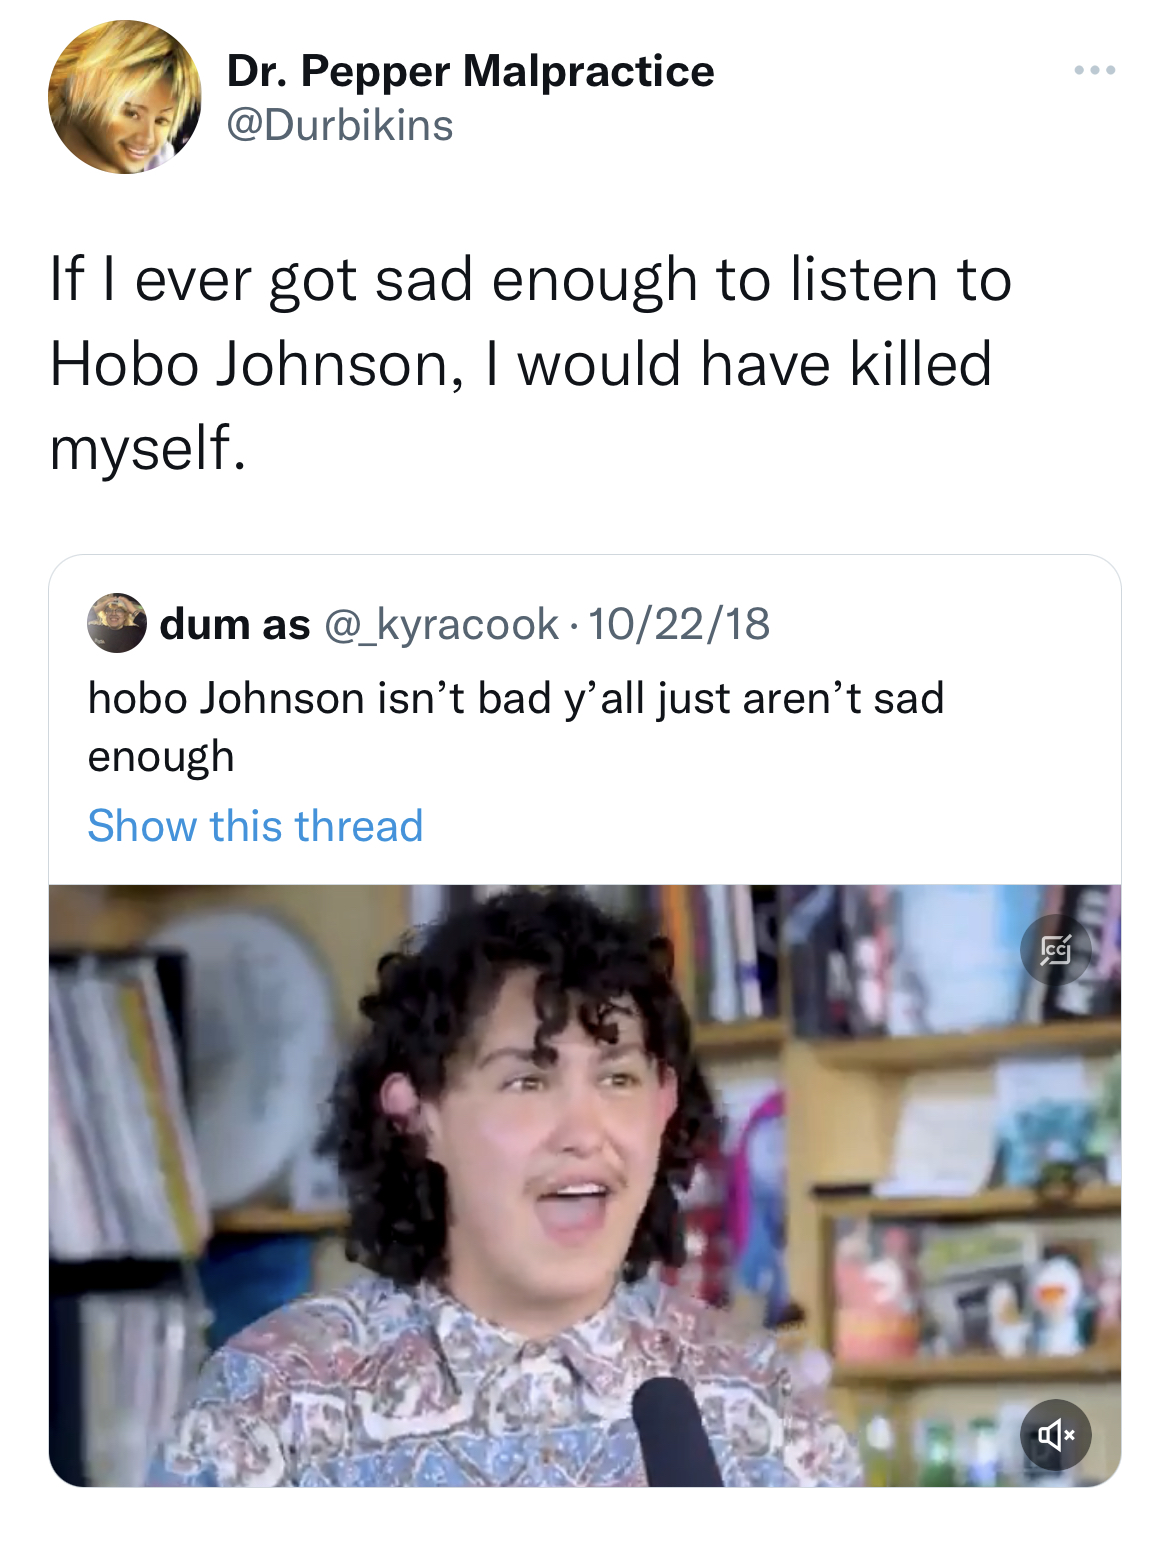 Tweets dunking on celebs - media - Dr. Pepper Malpractice If I ever got sad enough to listen to Hobo Johnson, I would have killed myself. dum as 102218 hobo Johnson isn't bad y'all just aren't sad enough Show this thread 54 4. Per